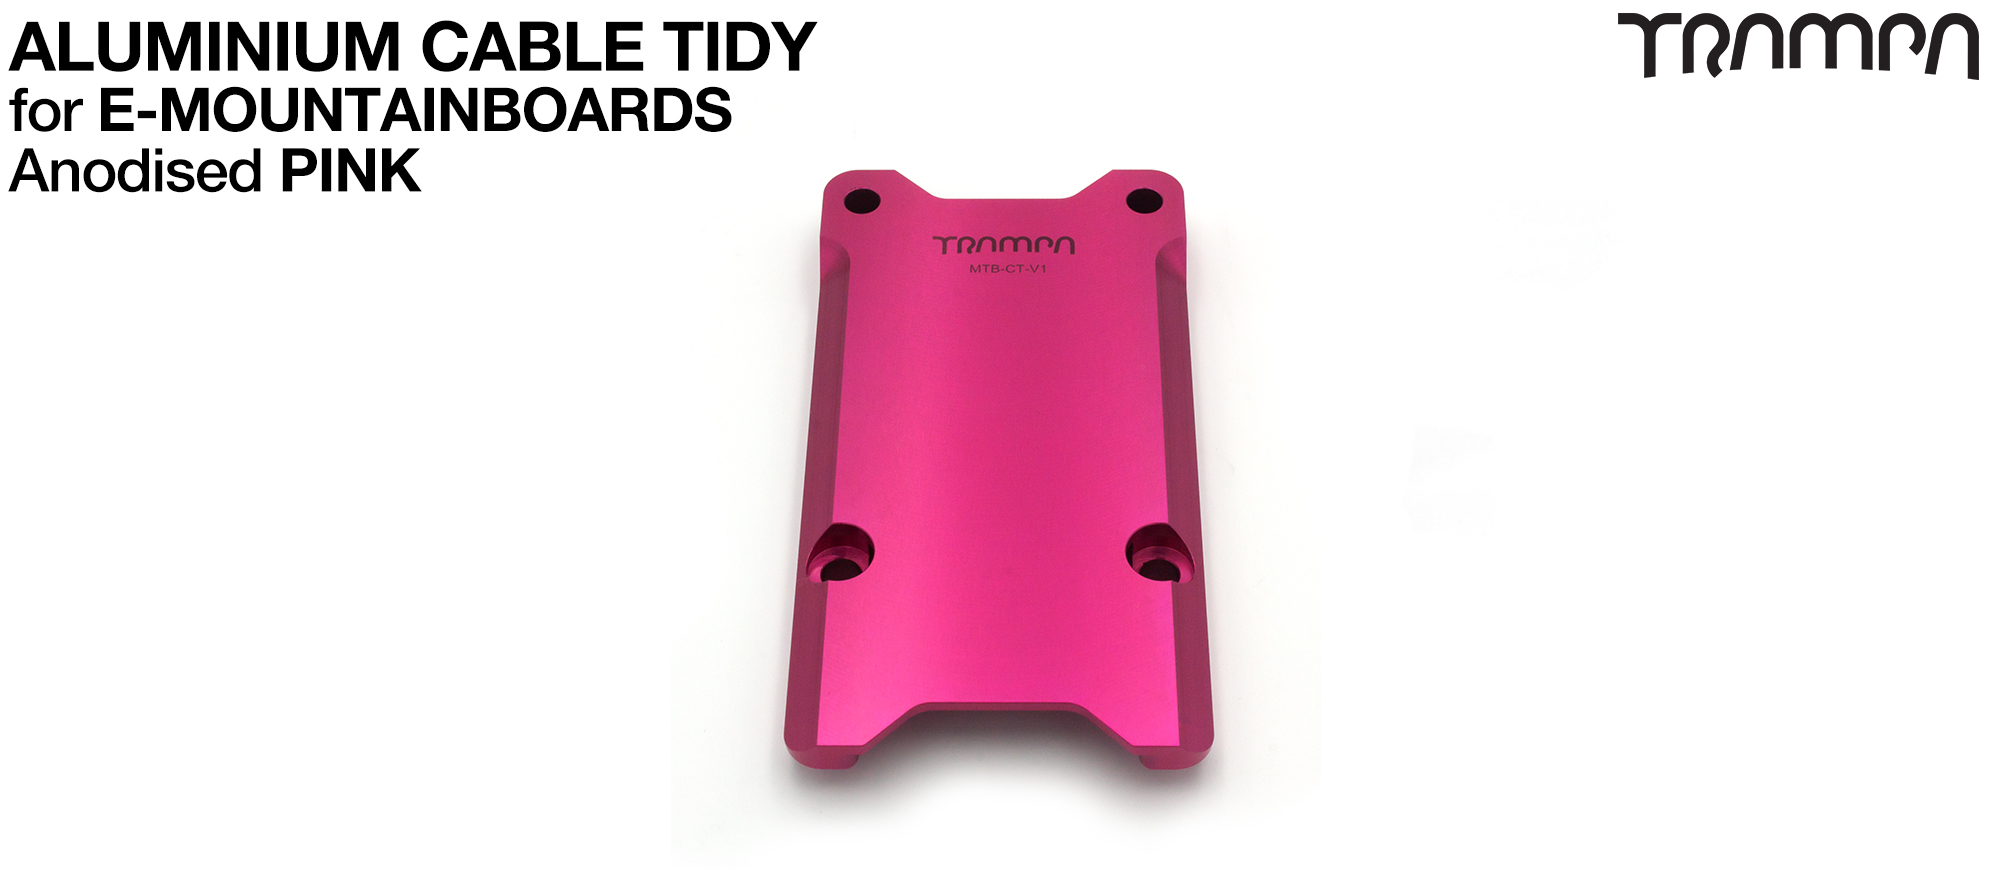 Anodised Aluminum Cable Tidy - PINK